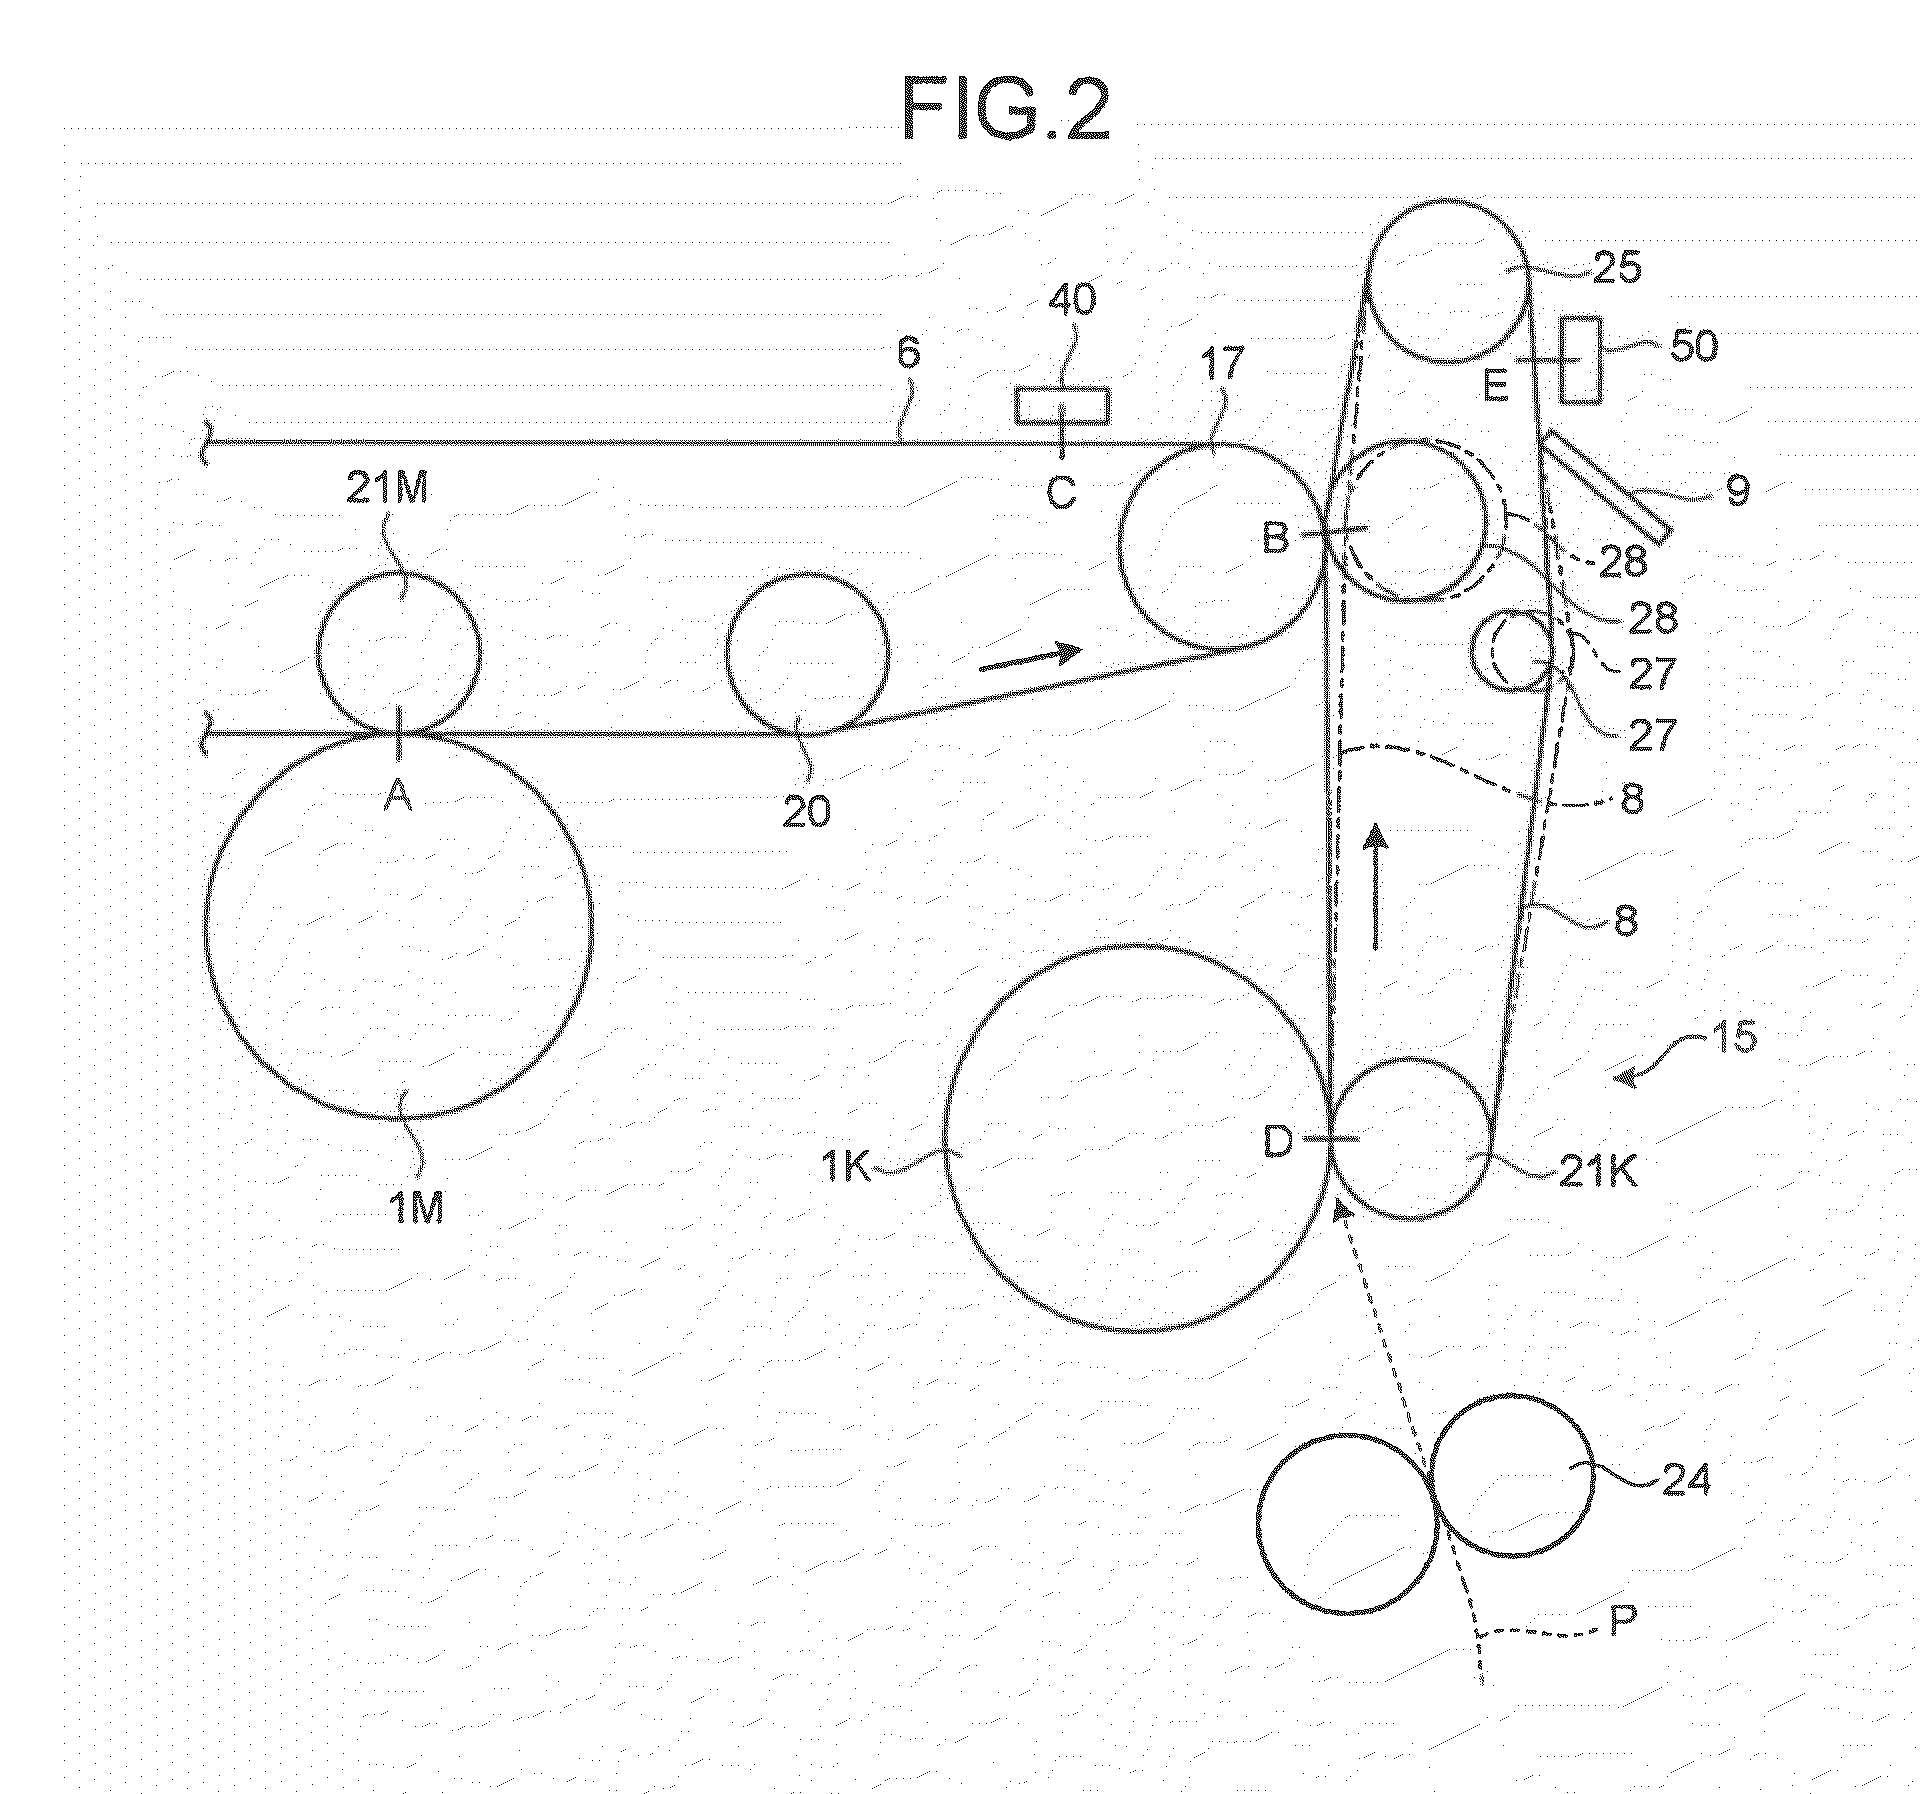 Image forming apparatus, image forming method, and computer program product